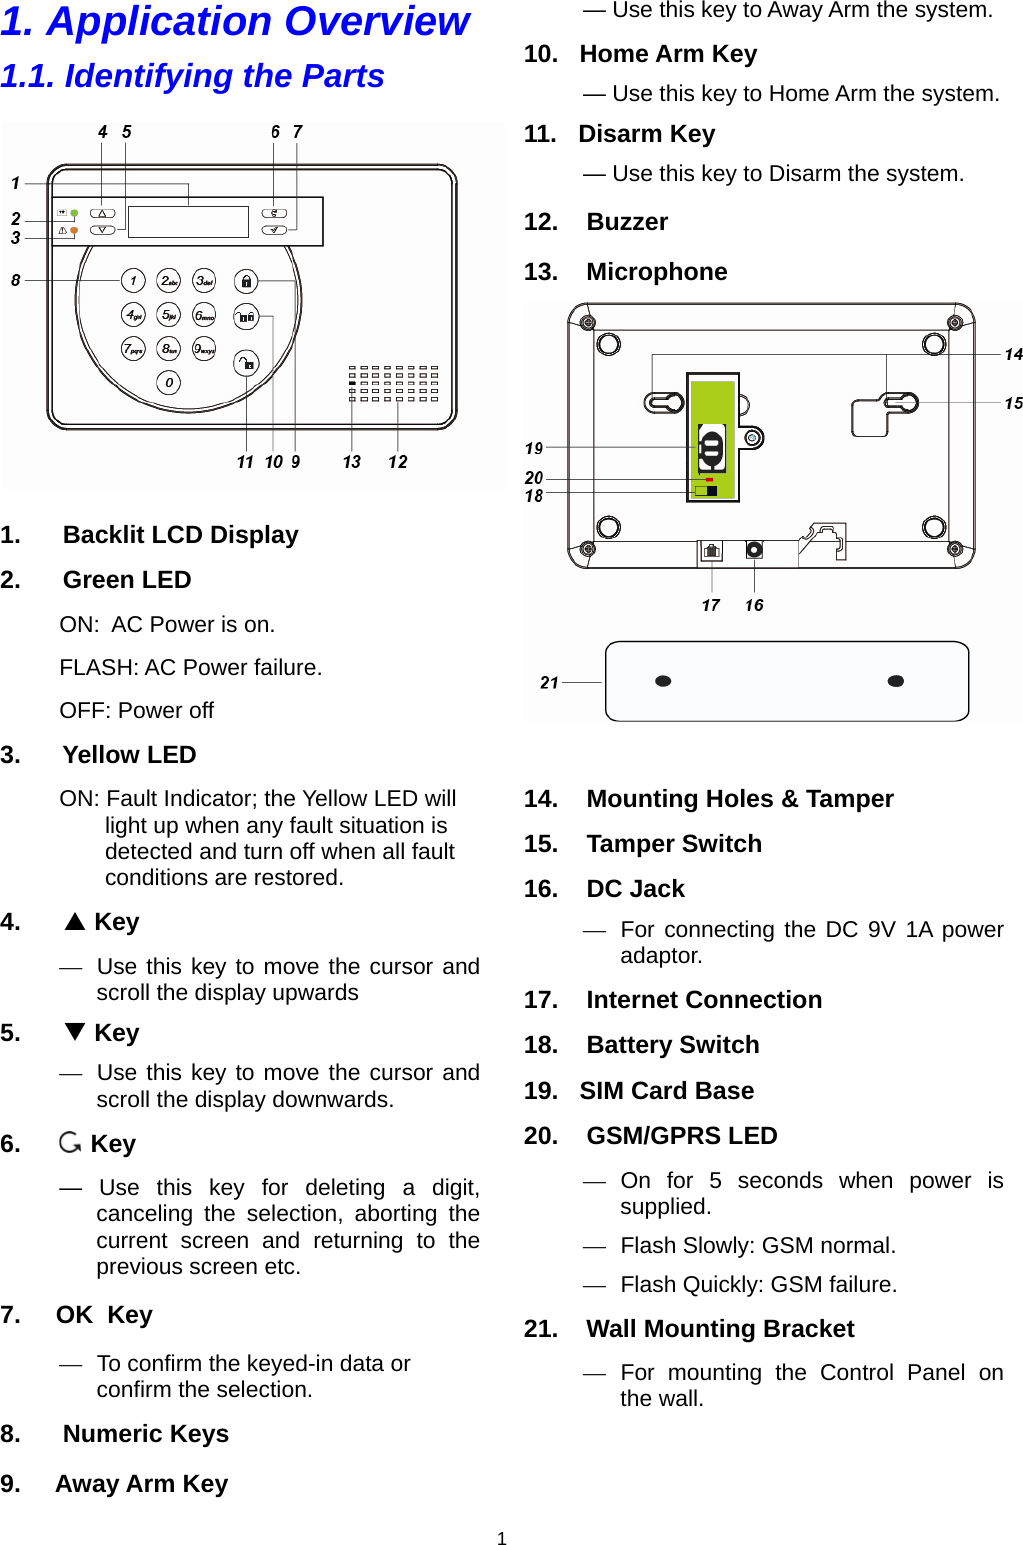                     11. Application Overview  1.1. Identifying the Parts          1.      Backlit LCD Display 2.      Green LED ON:  AC Power is on. FLASH: AC Power failure. OFF: Power off 3.      Yellow LED ON: Fault Indicator; the Yellow LED will light up when any fault situation is detected and turn off when all fault conditions are restored. 4.       Key  —  Use this key to move the cursor and scroll the display upwards 5.       Key   —  Use this key to move the cursor and scroll the display downwards. 6.          Key — Use this key for deleting a digit, canceling the selection, aborting the current screen and returning to the previous screen etc. 7.     OK  Key —  To confirm the keyed-in data or confirm the selection. 8.      Numeric Keys 9.     Away Arm Key — Use this key to Away Arm the system. 10.   Home Arm Key — Use this key to Home Arm the system. 11.   Disarm Key — Use this key to Disarm the system. 12.    Buzzer 13.    Microphone   14.    Mounting Holes &amp; Tamper 15.    Tamper Switch 16.    DC Jack —  For connecting the DC 9V 1A power adaptor. 17.    Internet Connection 18.    Battery Switch 19.   SIM Card Base 20.    GSM/GPRS LED — On for 5 seconds when power is supplied. —  Flash Slowly: GSM normal. —  Flash Quickly: GSM failure. 21.    Wall Mounting Bracket — For mounting the Control Panel on the wall.    